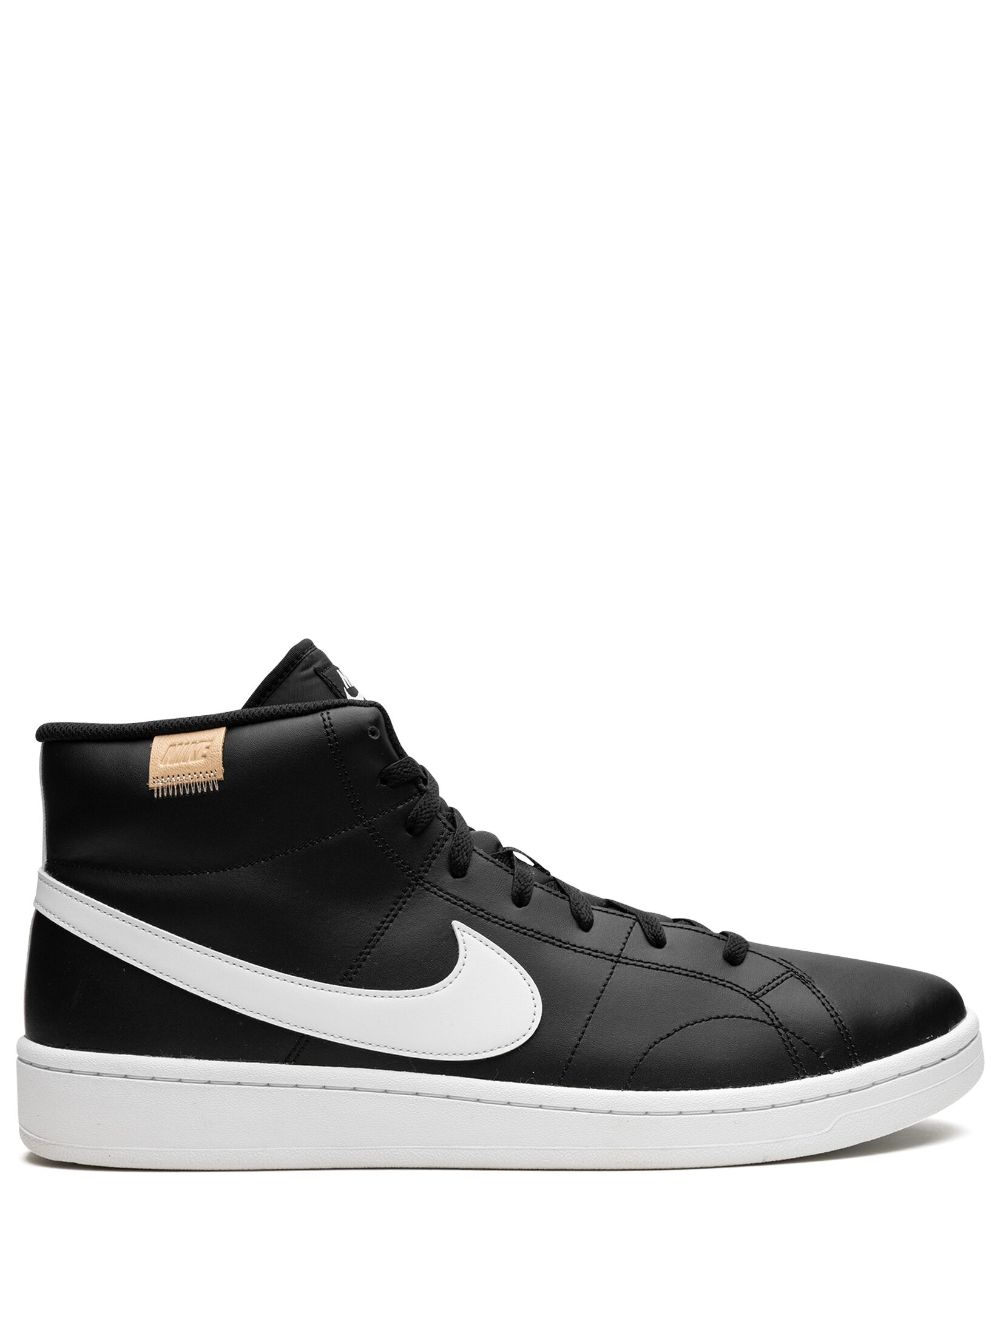 Nike Court Royale 2 Mid Sneakers In Black And White